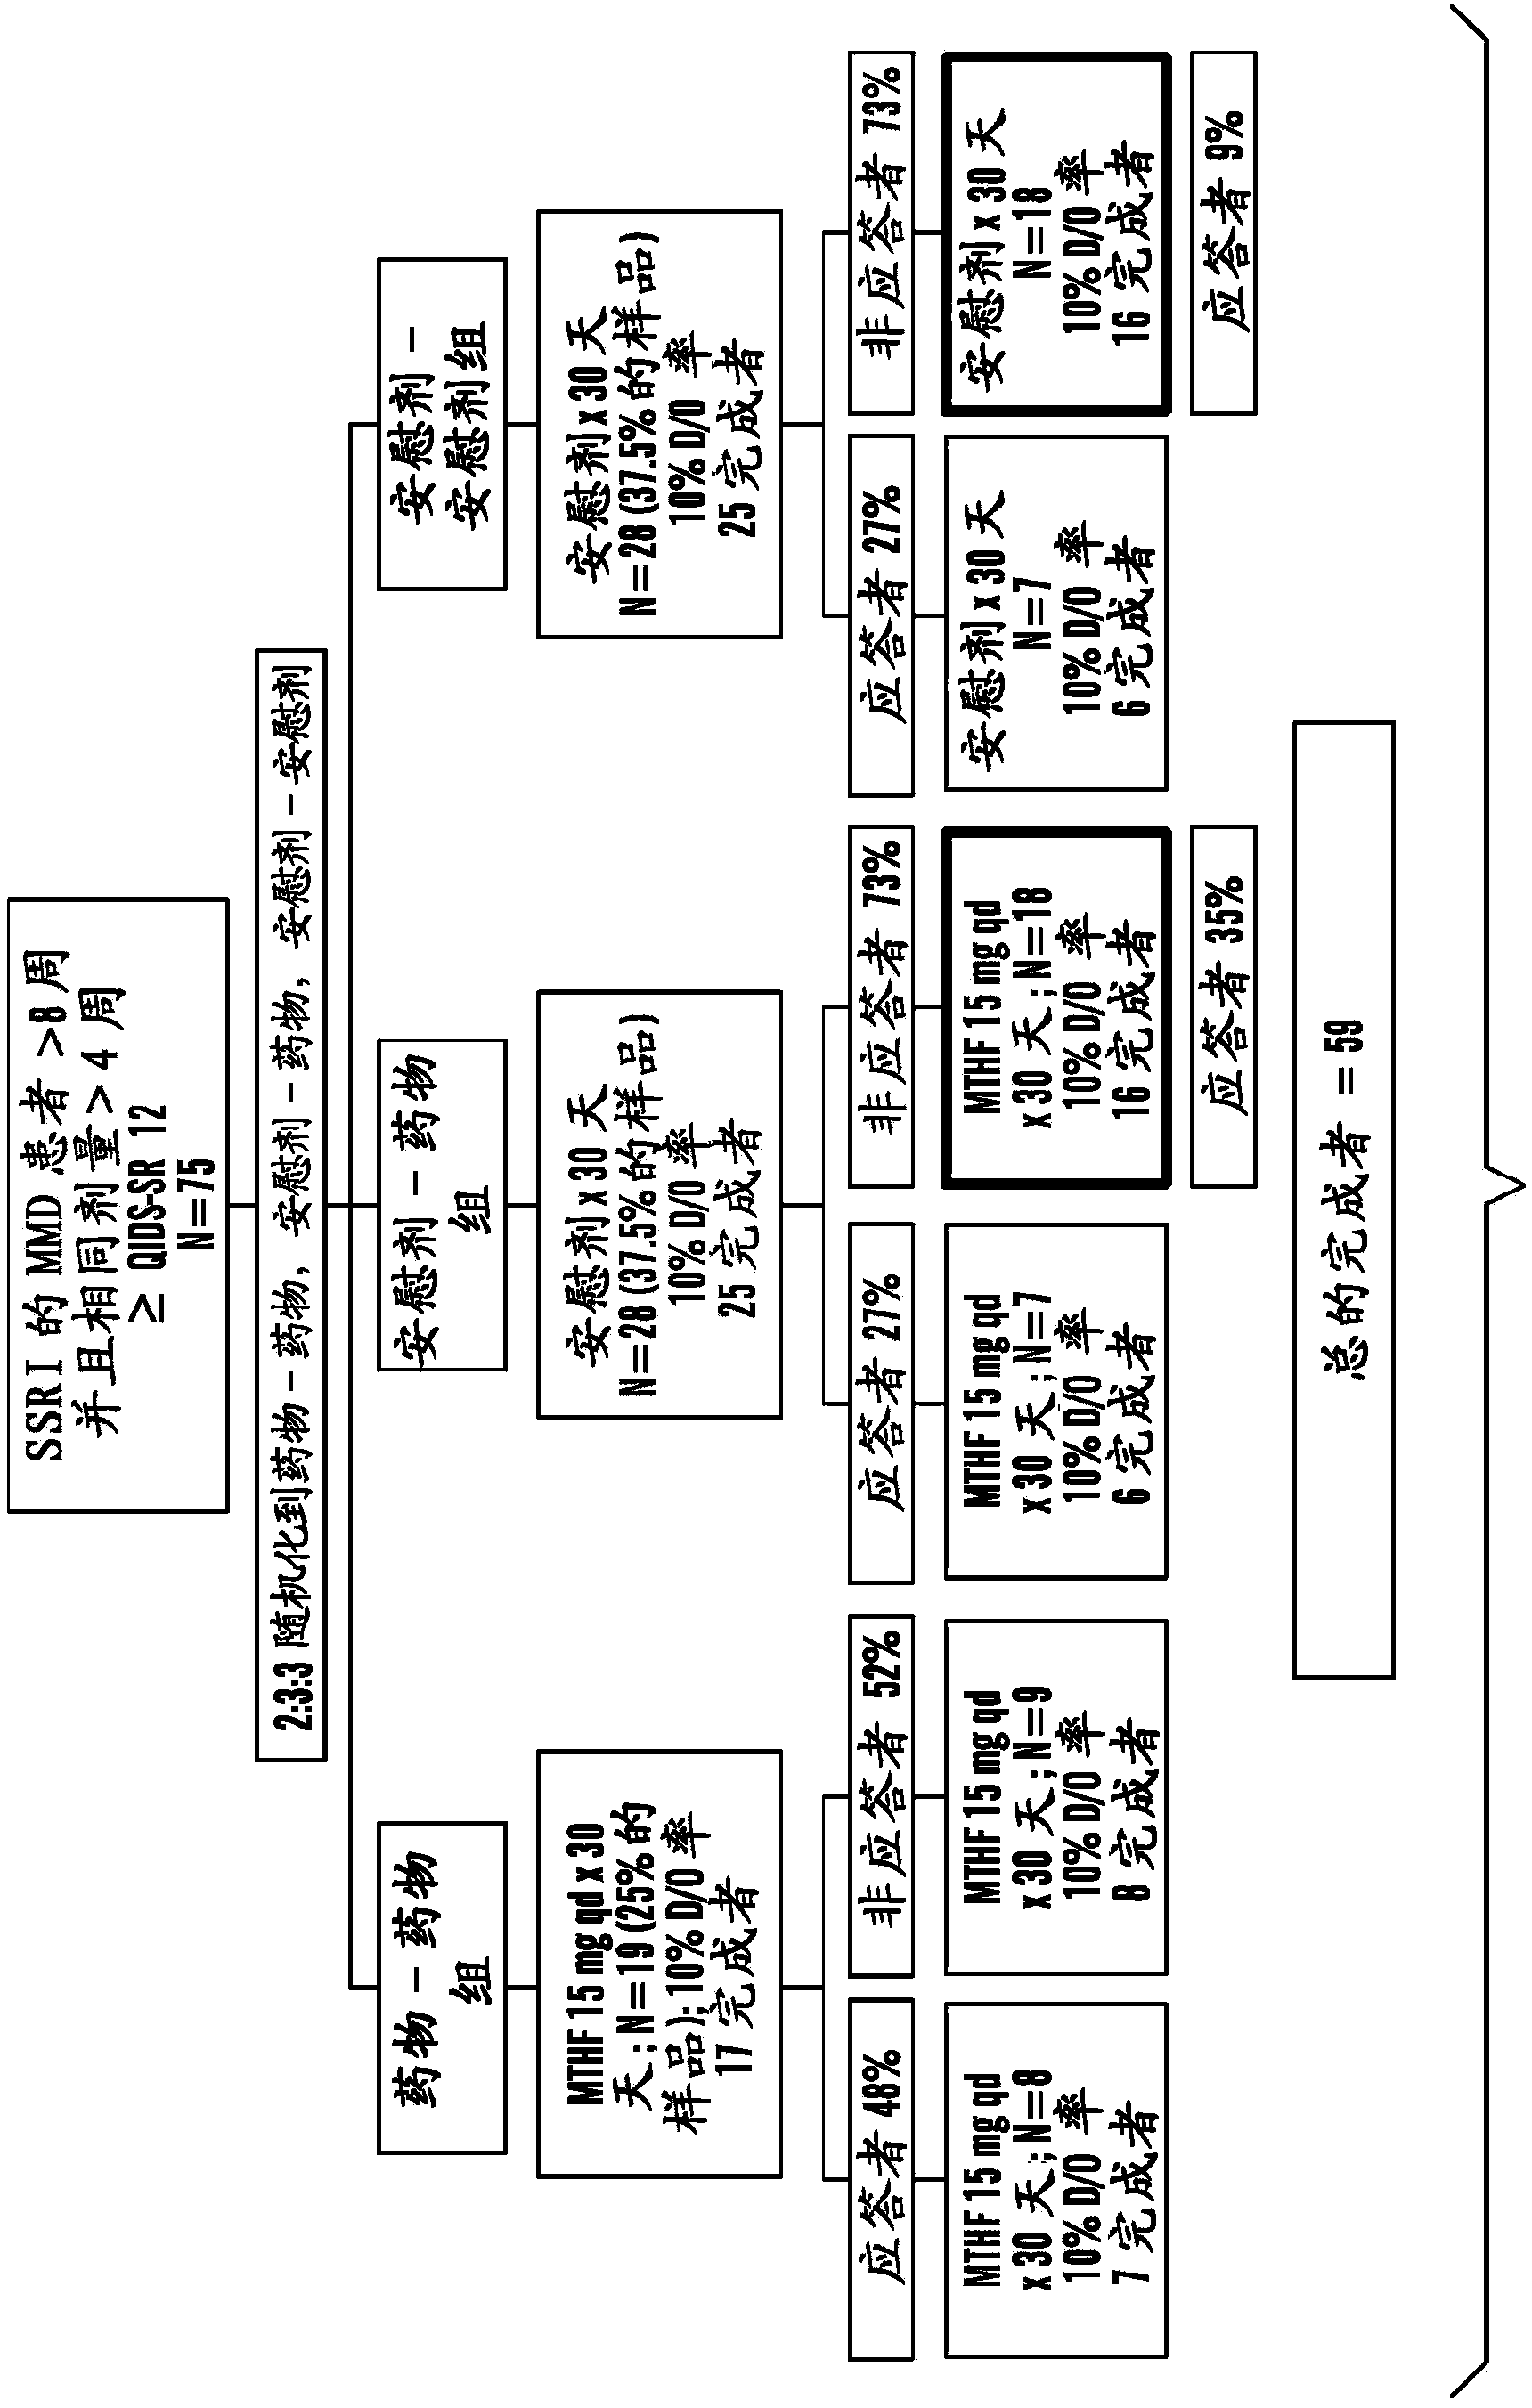 Assays For Selecting A Treatment Regimen For A Subject With Depression And Methods For Treatment